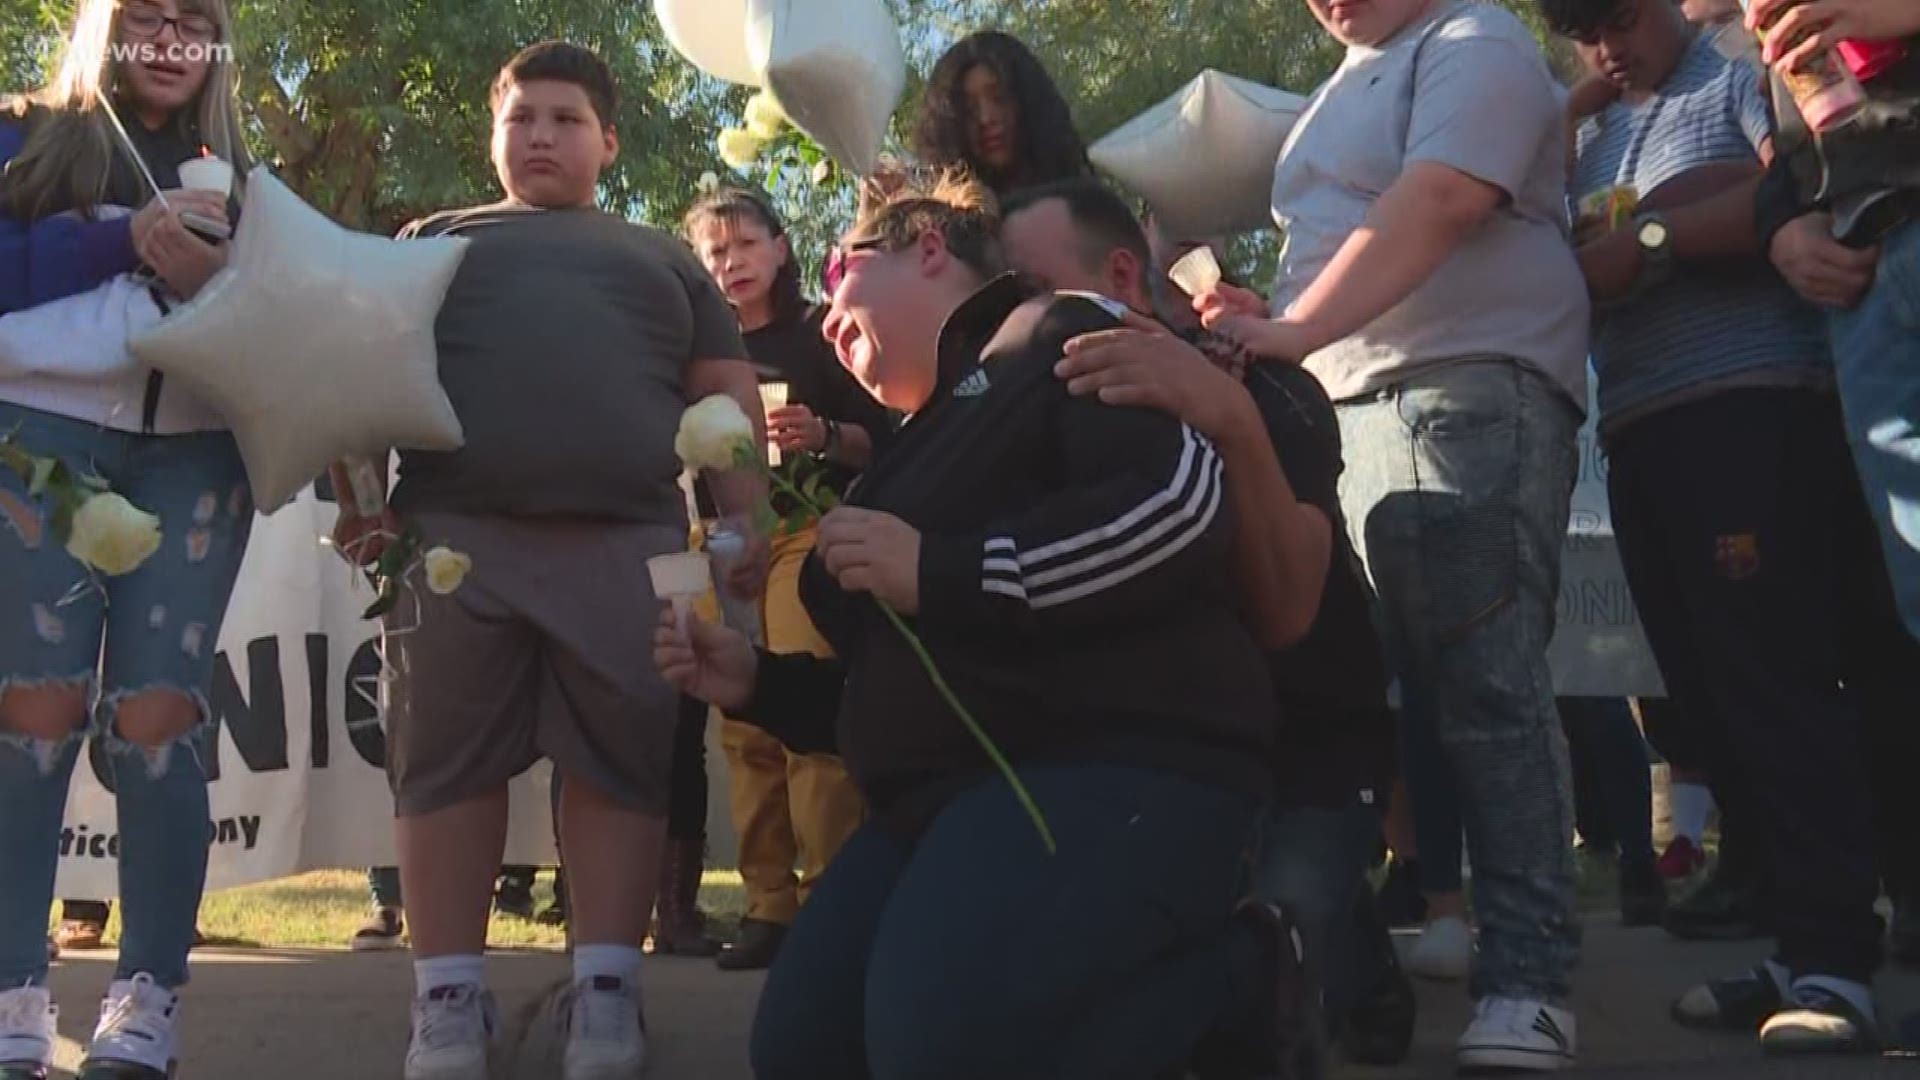 The family held a vigil Saturday at the spot where Antonio Arce collapsed and died.